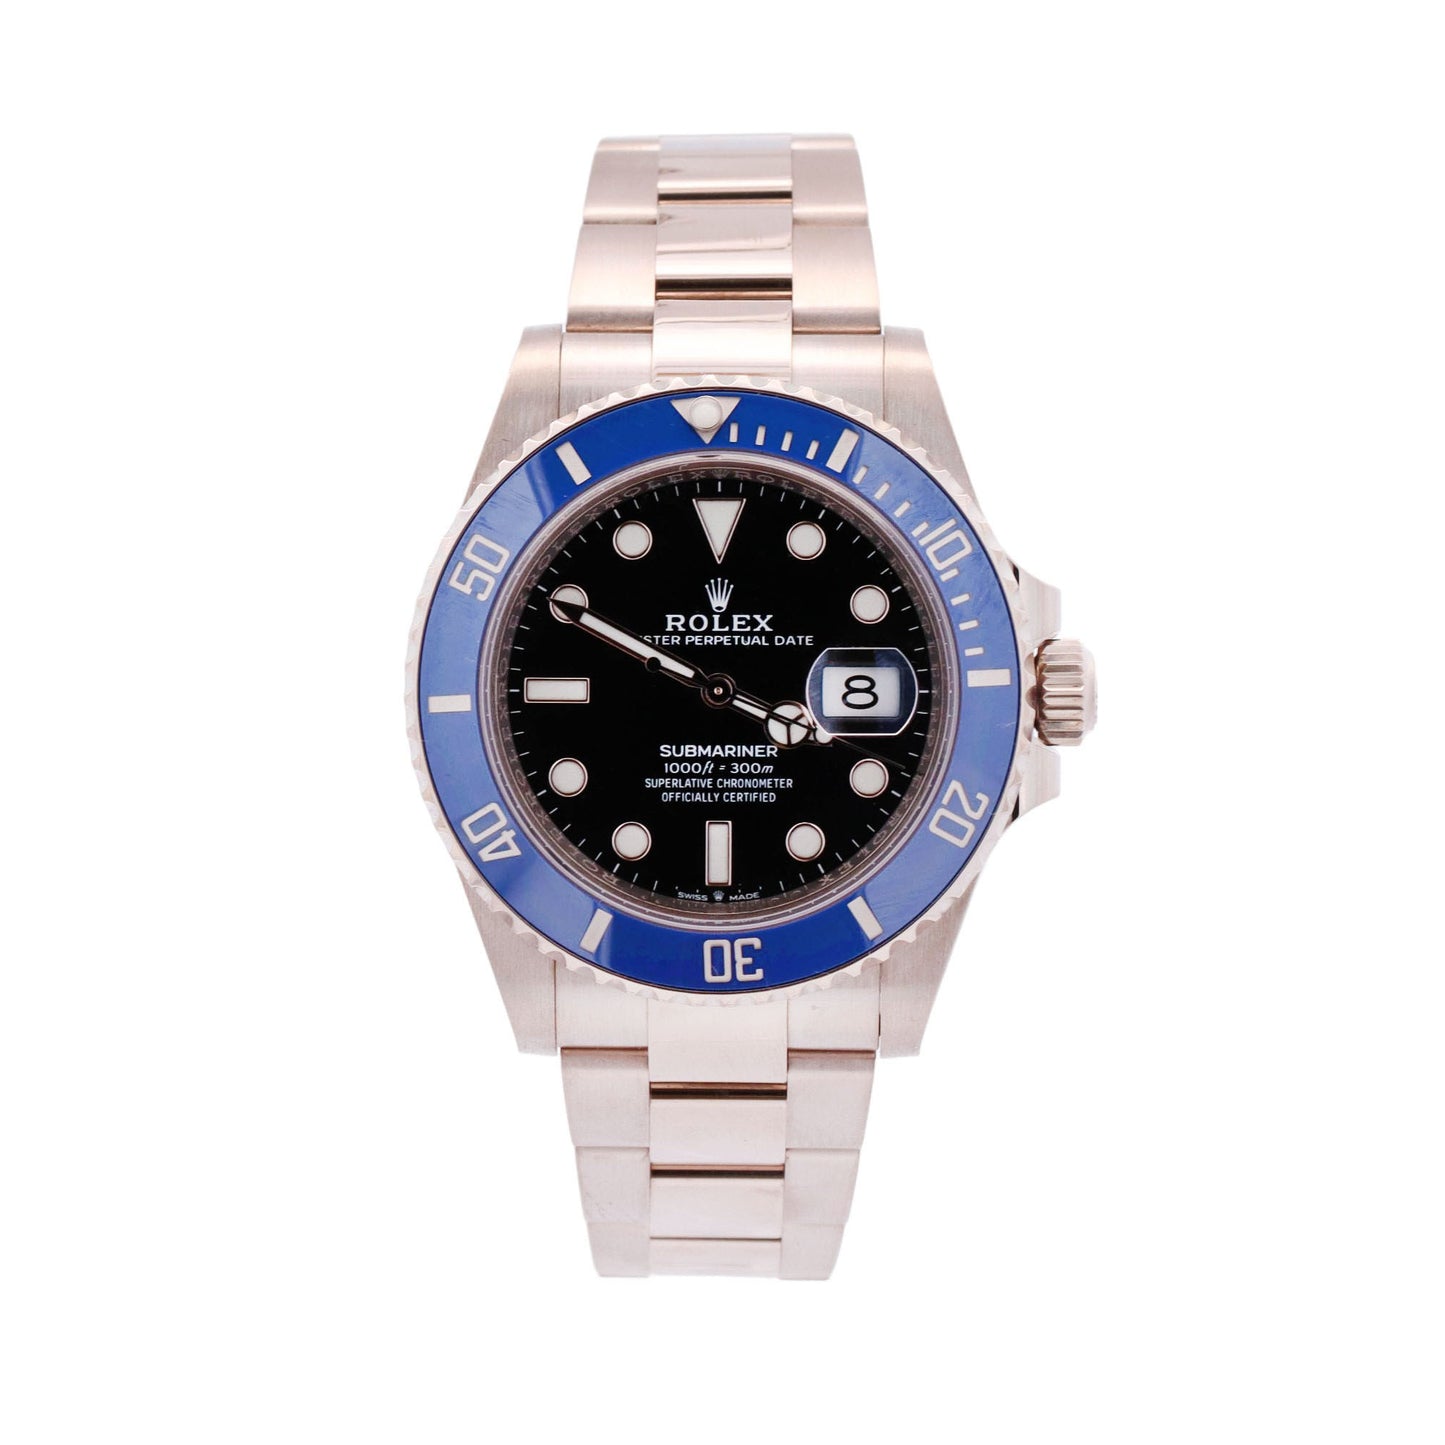 Rolex Submariner White Gold 41mm Black Dot Dial Watch Reference #: 126619LB - Happy Jewelers Fine Jewelry Lifetime Warranty